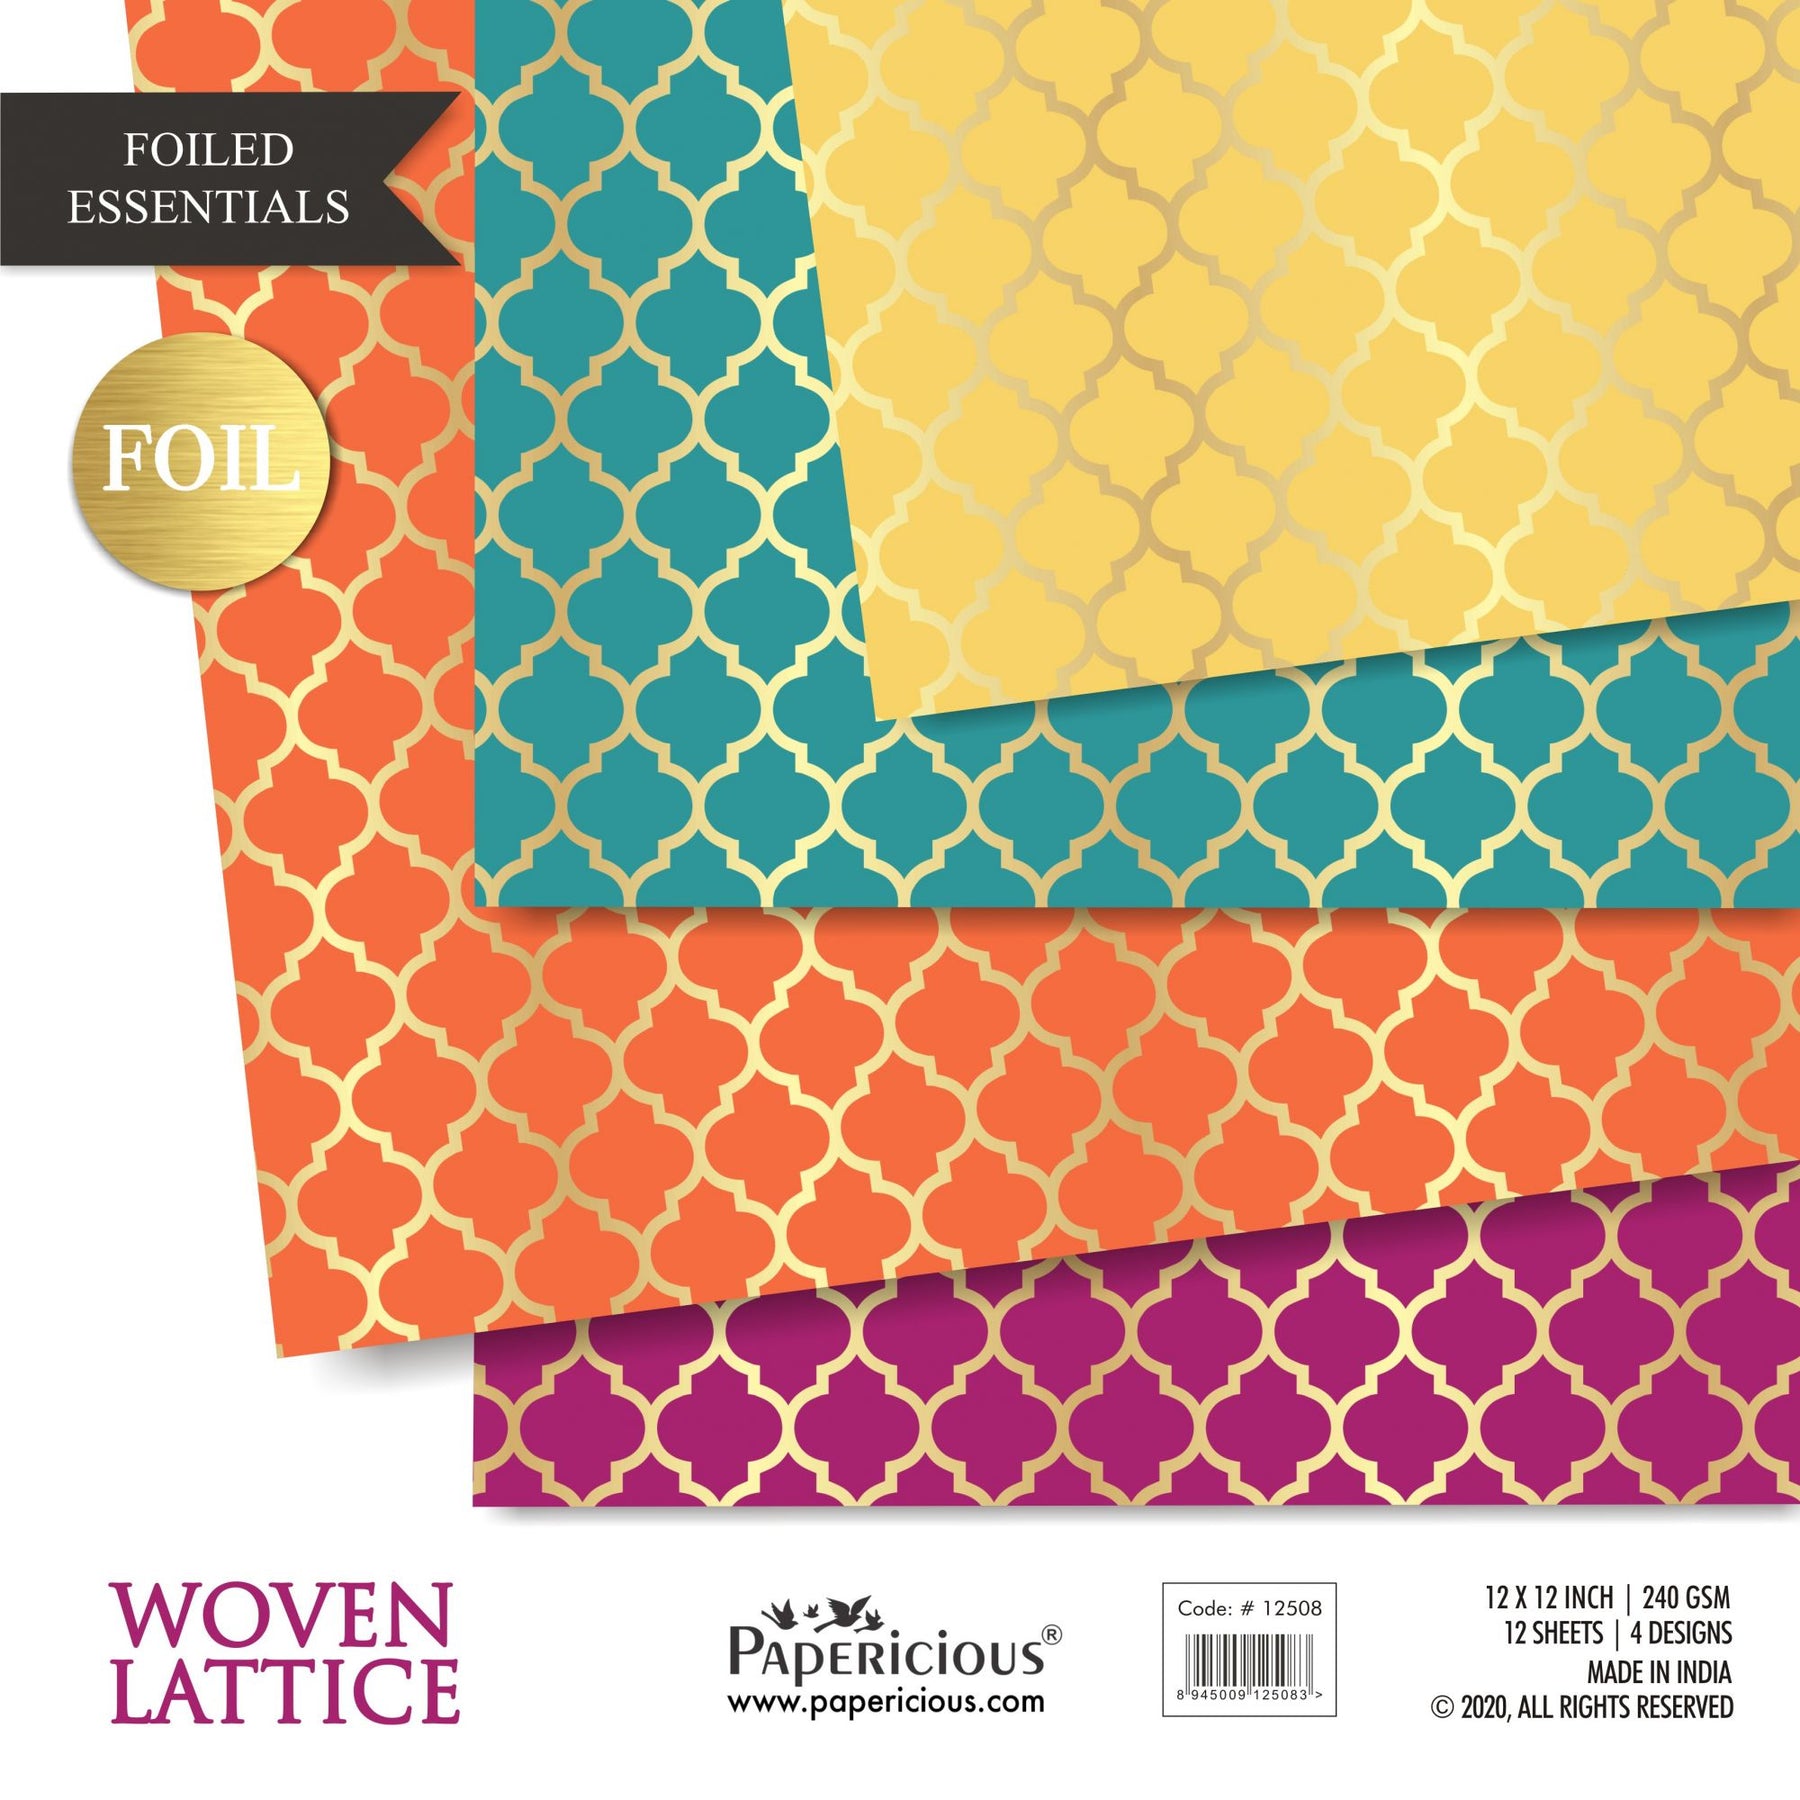 Papericious - Wooven Lattice - Golden Foiled Pattern Scrapbook Papers 12x12 inch / 12 sheets